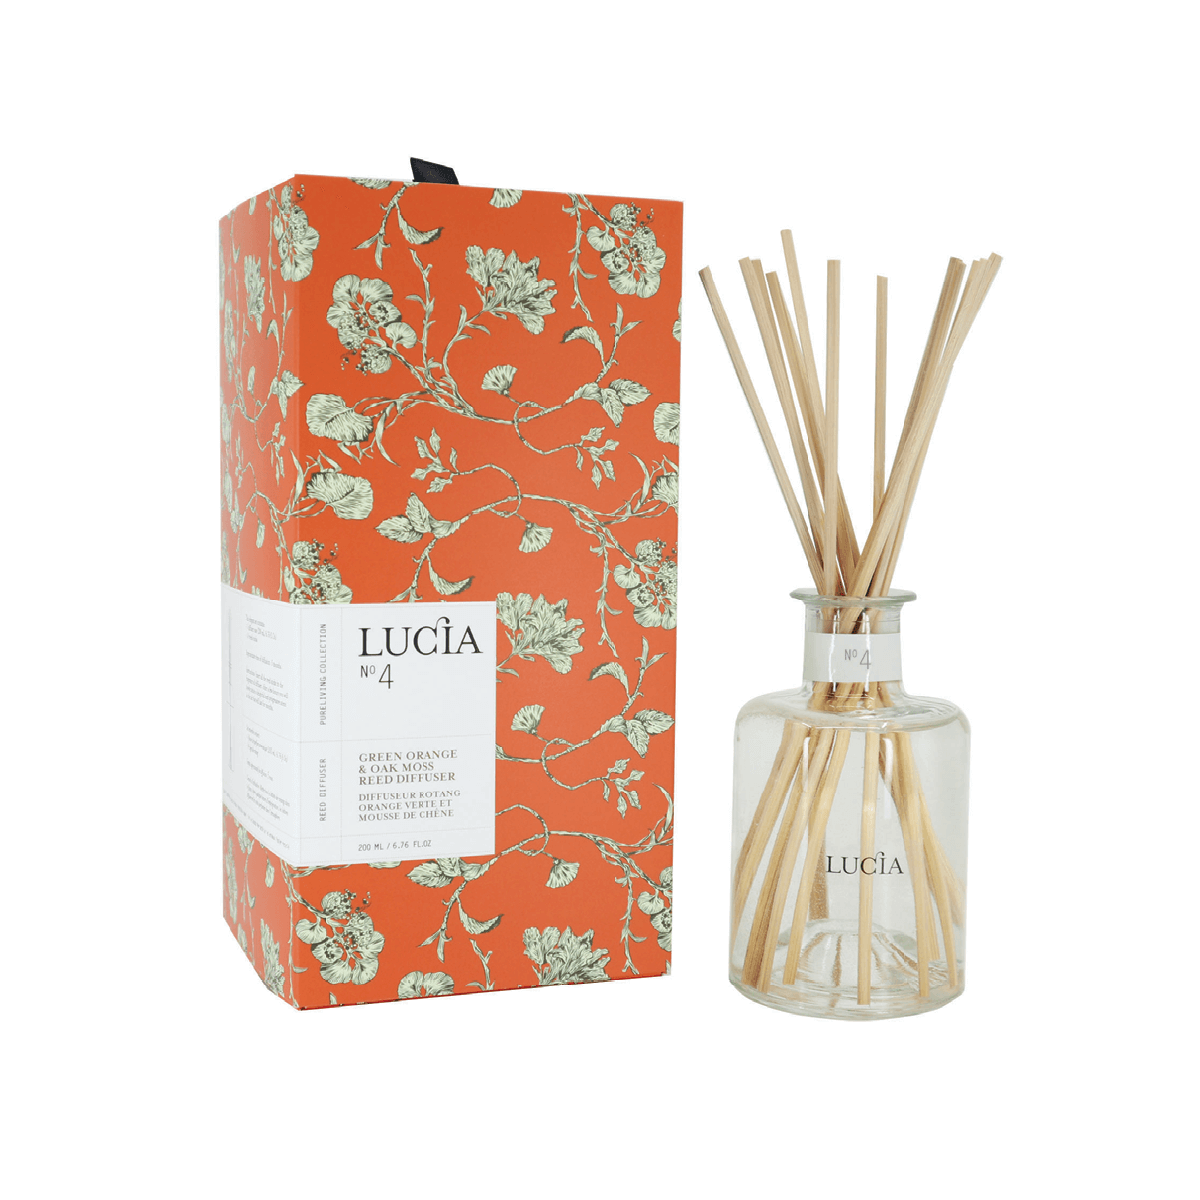 Lucia Reed Diffusers